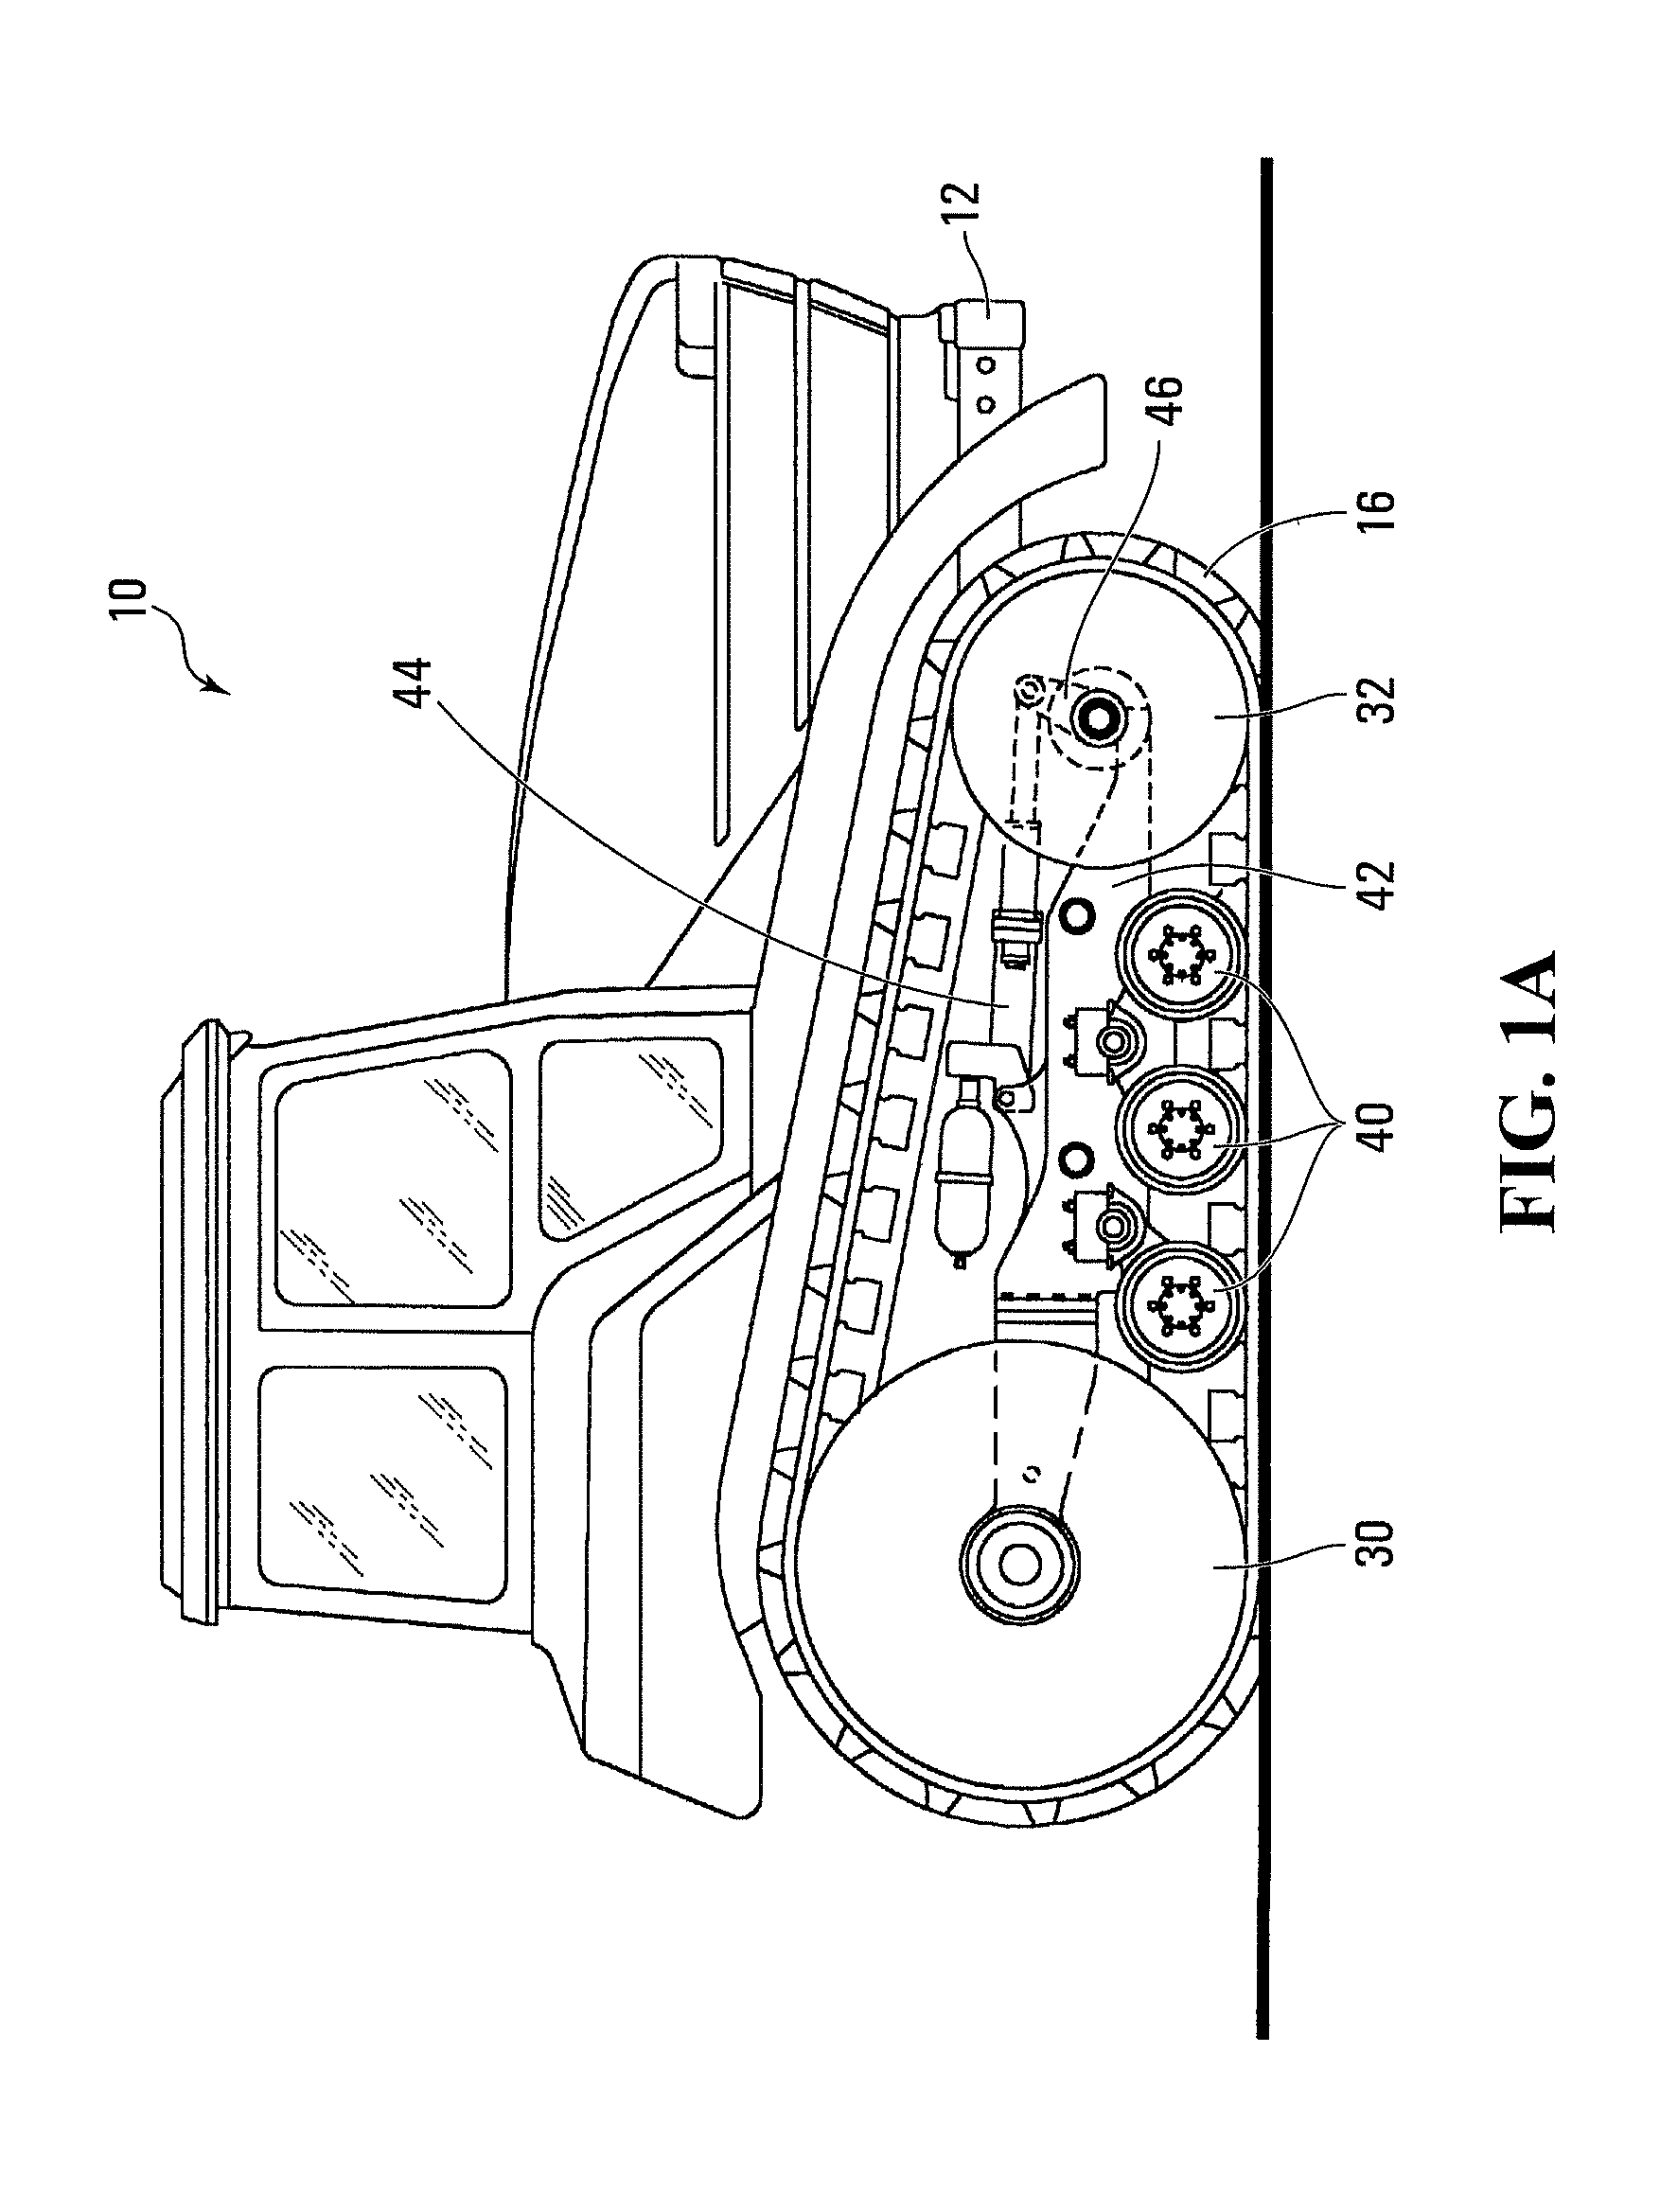 Track drive mode management system and methods